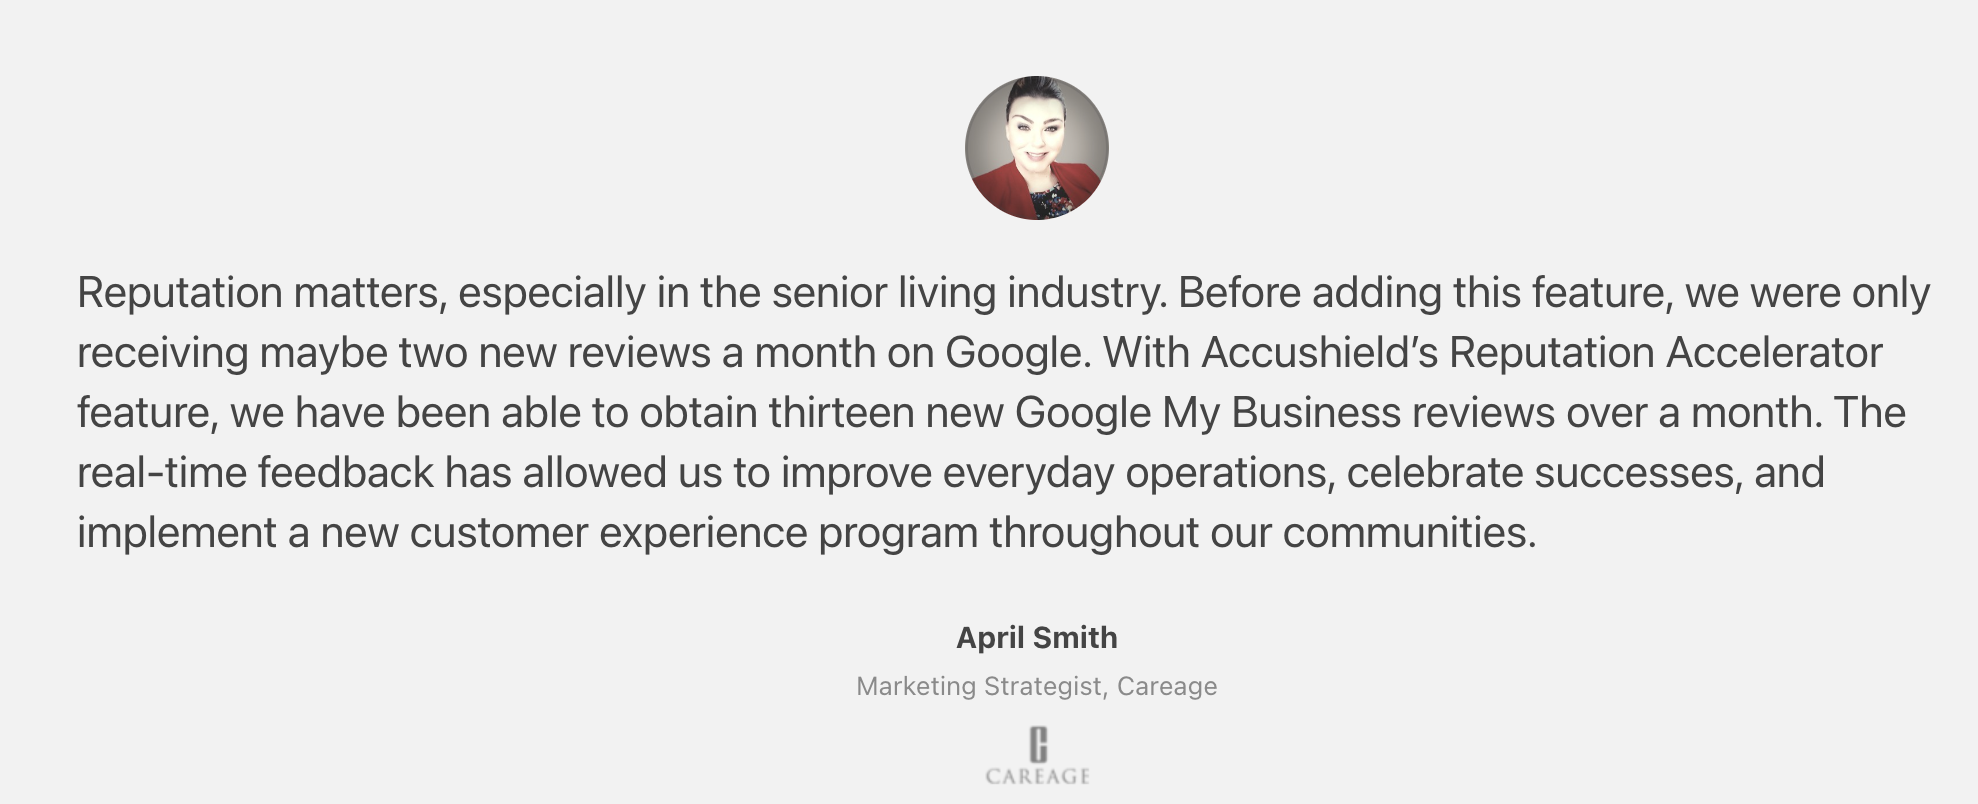 Reputation Accelerator Customer Quote by April Smith, Marketing Strategist, Careage: "“Before adding this feature, we were only receiving maybe two new reviews a month on Google. With Accushield’s Reputation Accelerator feature, we have been able to obtain thirteen new Google My Business reviews over a month. The real-time feedback has allowed us to improve everyday operations, celebrate successes, and implement a new customer experience program throughout our communities” ~April Smith, Marketing Strategist, Careage"